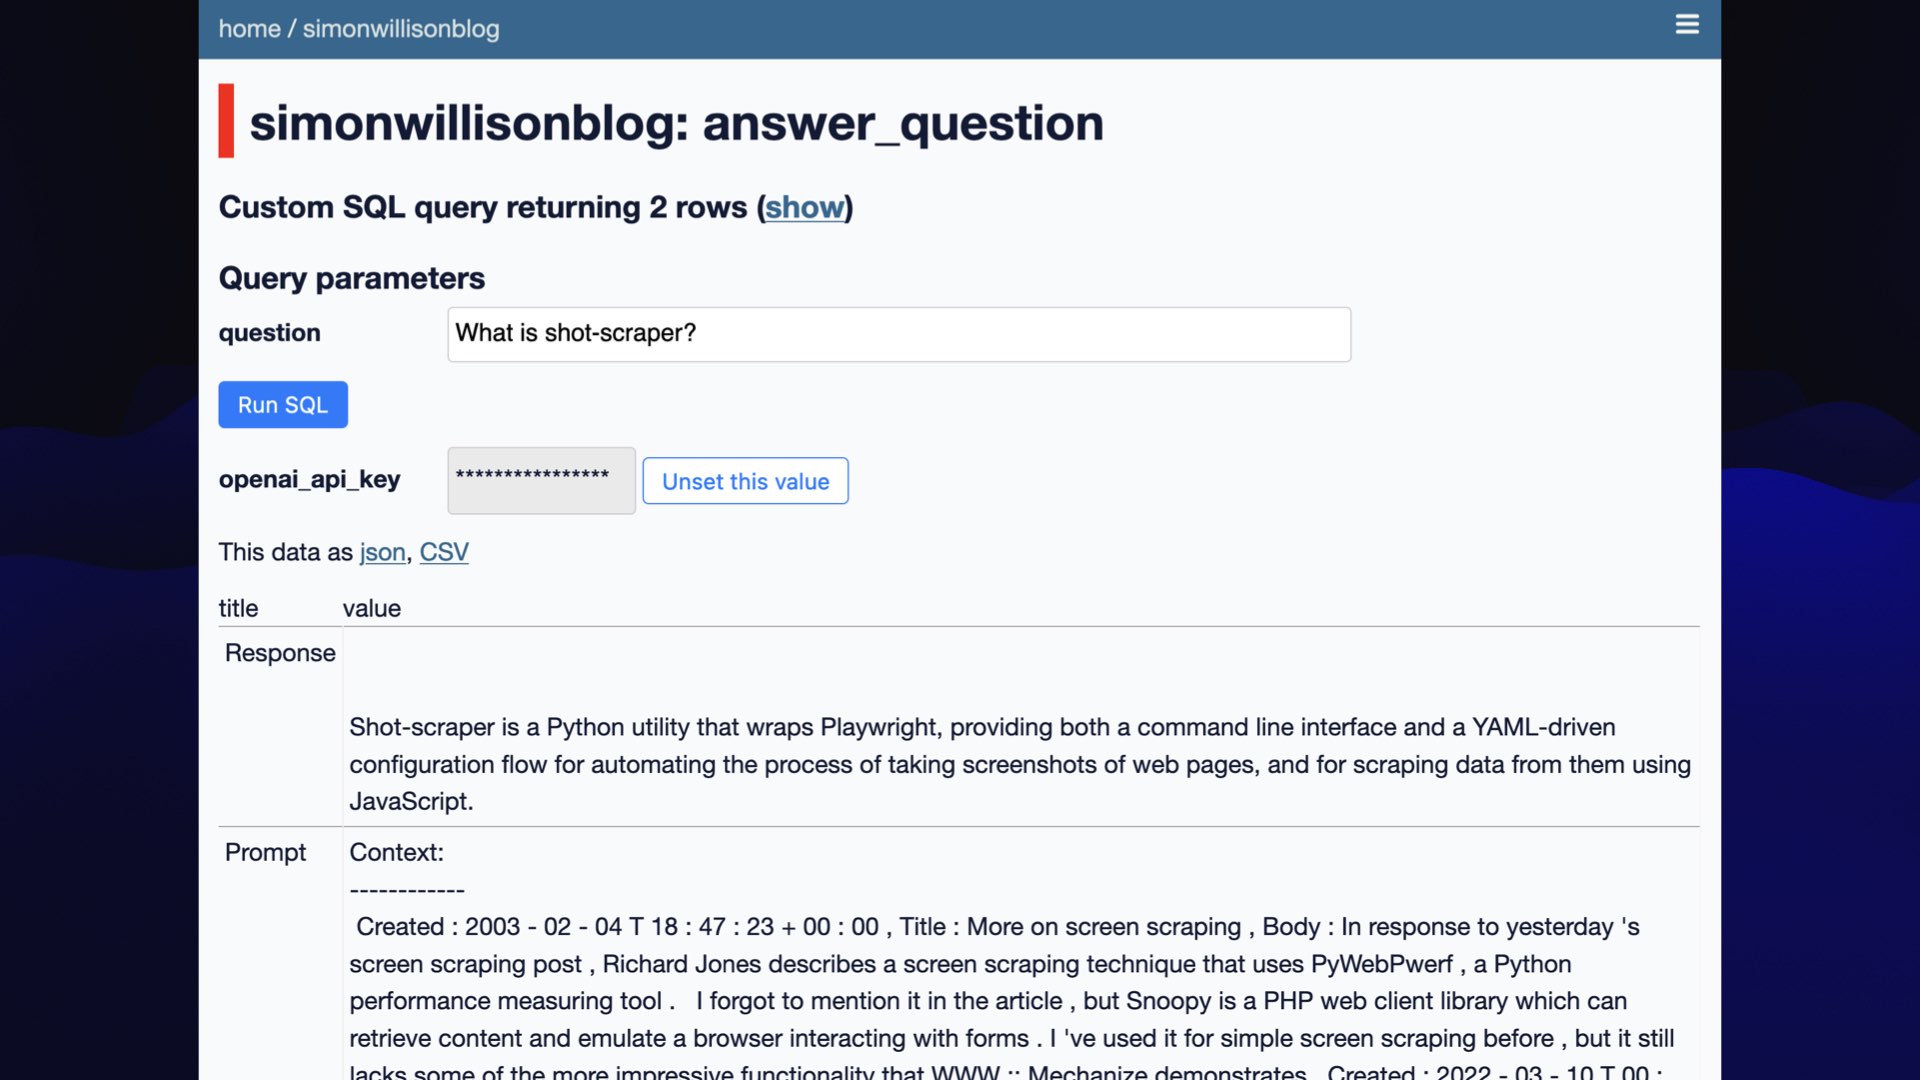 Screenshot of Datasette  simonwillisonblog: answer_question  Custom SQL query returning 2 rows  Query parameters  question: What is shot-scraper?  openai_api_key: Hidden  Response:  Shot-scraper is a Python utility that wraps Playwright, providing both a command line interface and a YAML-driven configuration flow for automating the process of taking screenshots of web pages, and for scraping data from them using JavaScript.  Prompt Context Created : 2003-02-04 18:47:23 Title : More on screen scraping Body : In response to yesterday's screen scraping post , Richard Jones describes a screen scraping technique that uses PyWebPwerf, a Python... [lots more text]